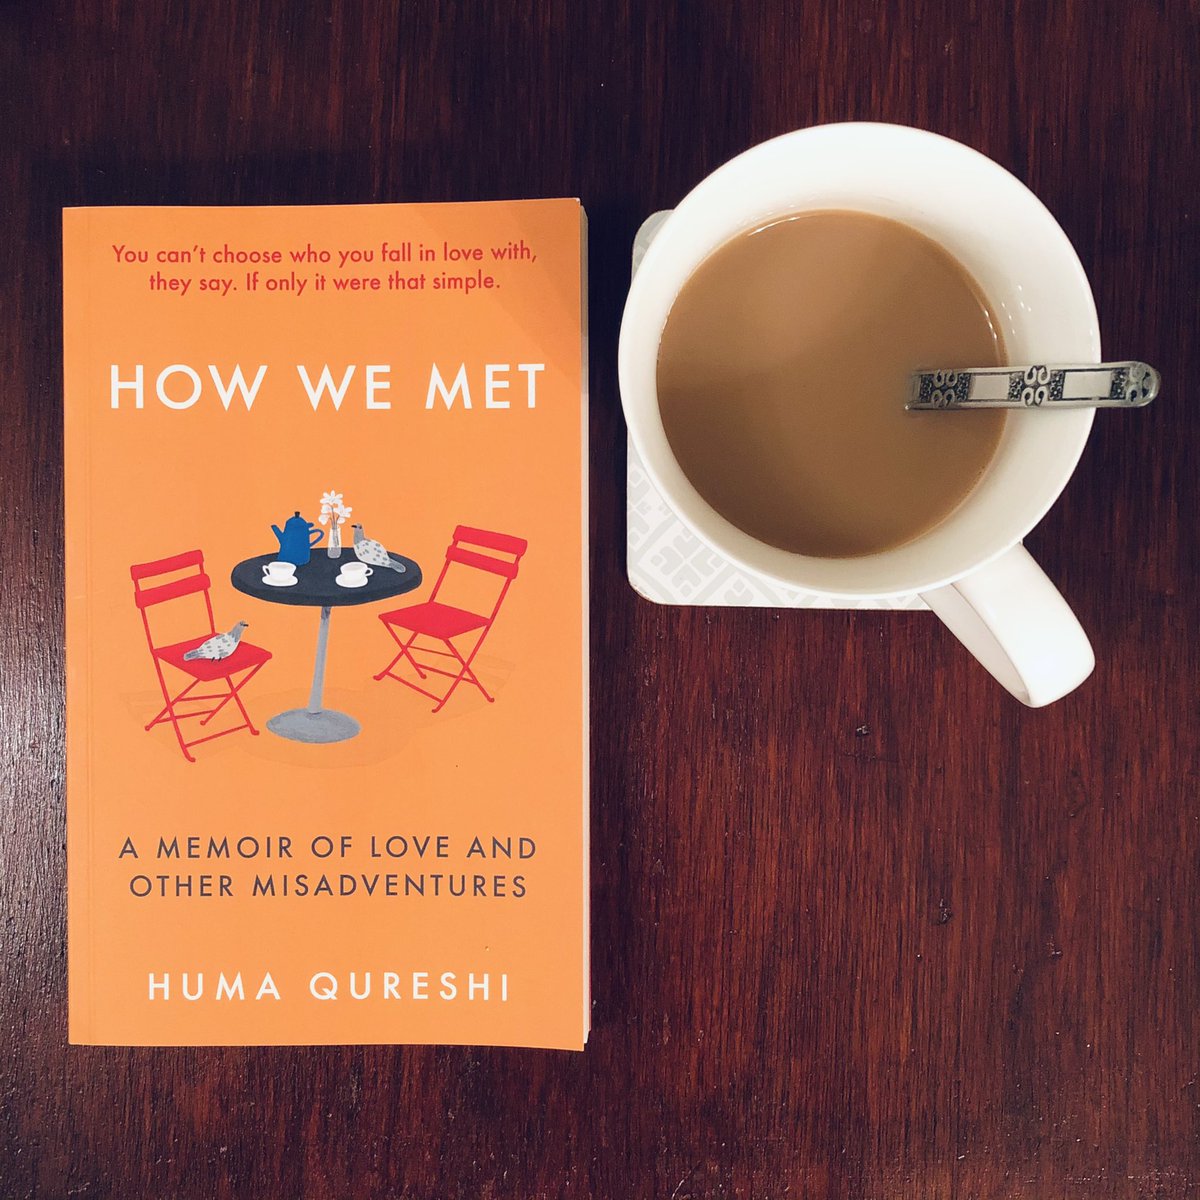 Just about to start my next book #HowWeMet which sounds amazing. Also happy publication day to @huma_qureshi_uk 

So go and grab yourself a copy because this is one book not to be missed!